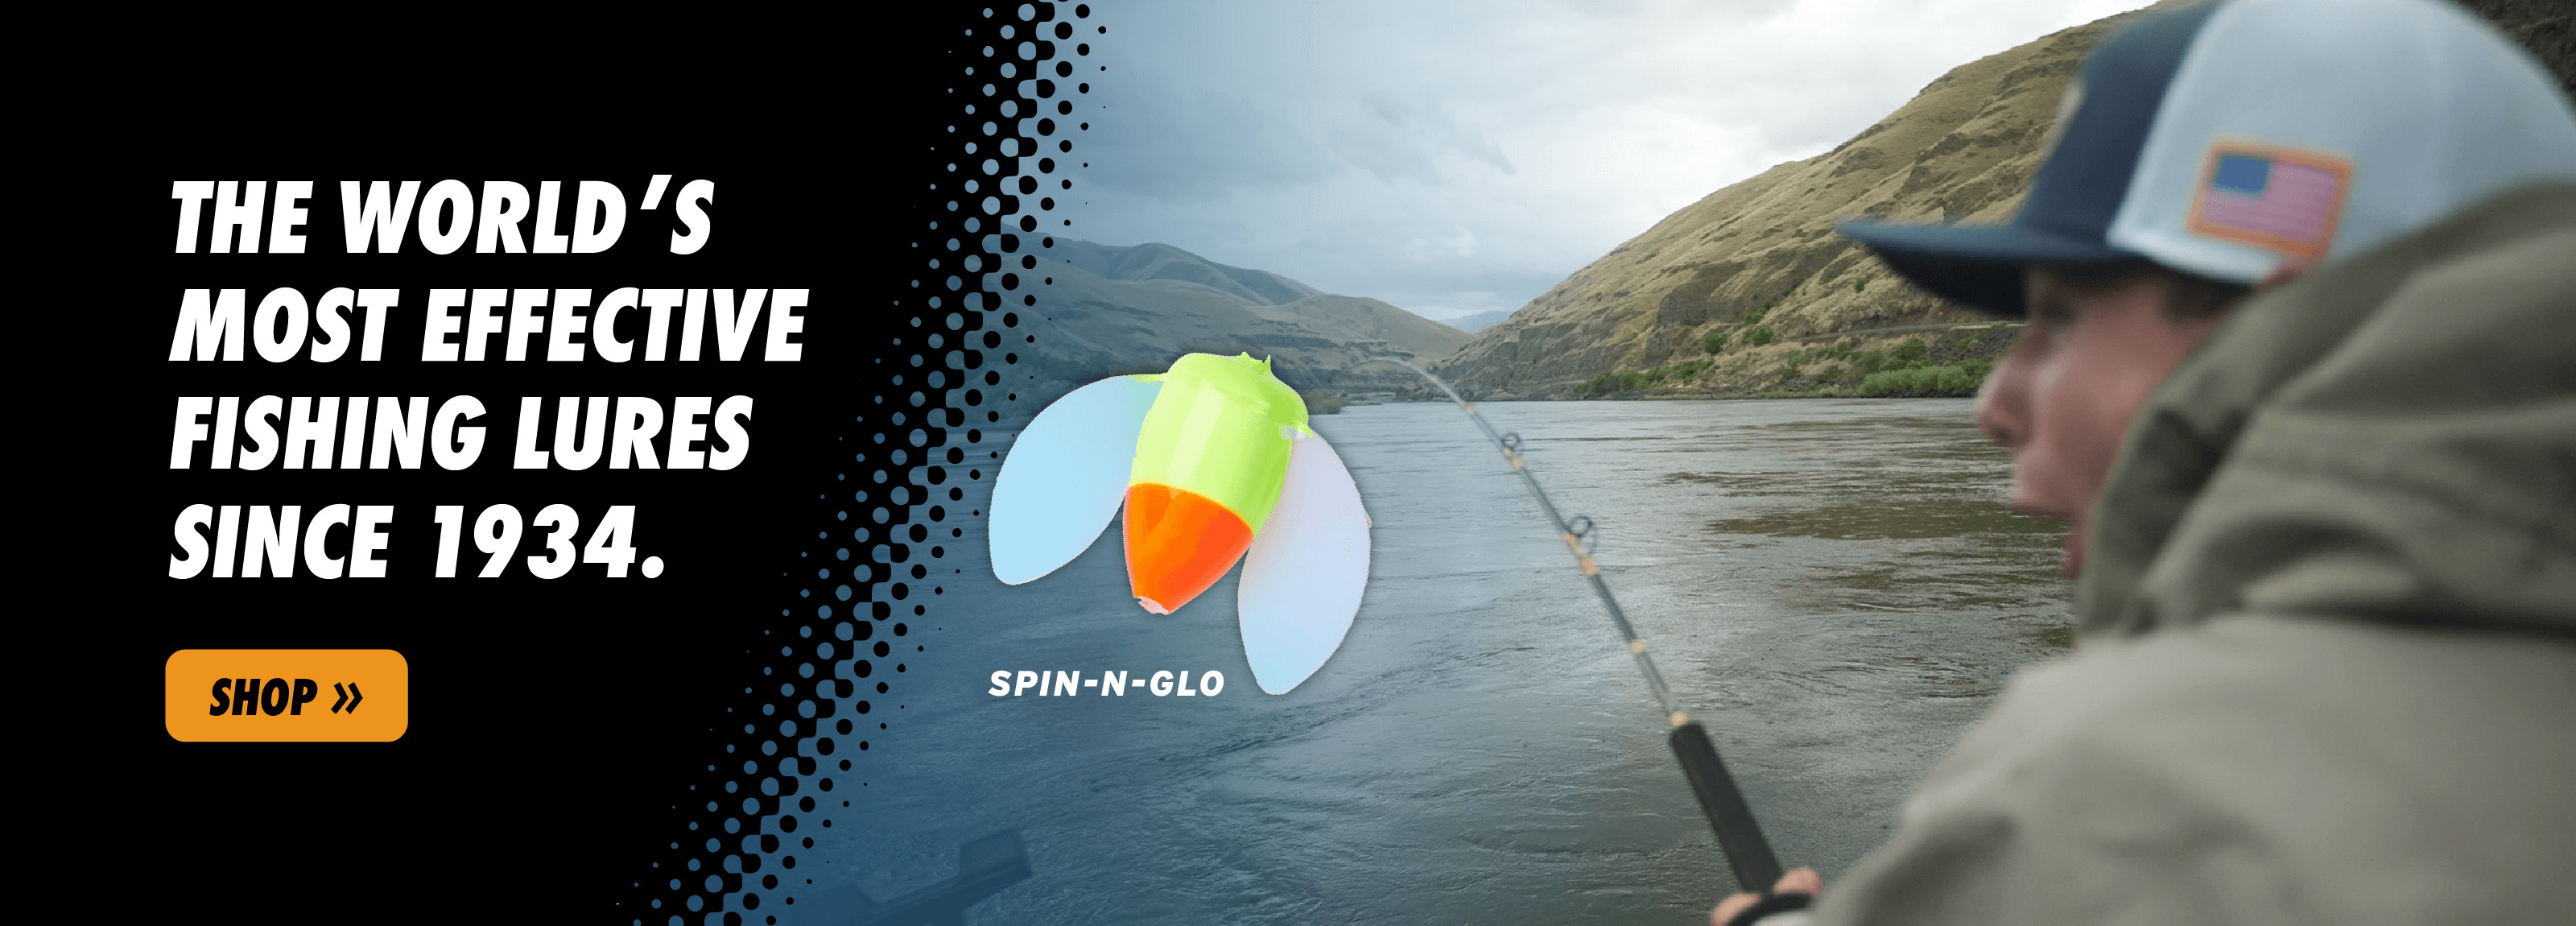 World;s Most Effective Fishing Lures since 1934 - Spin-N-Glo